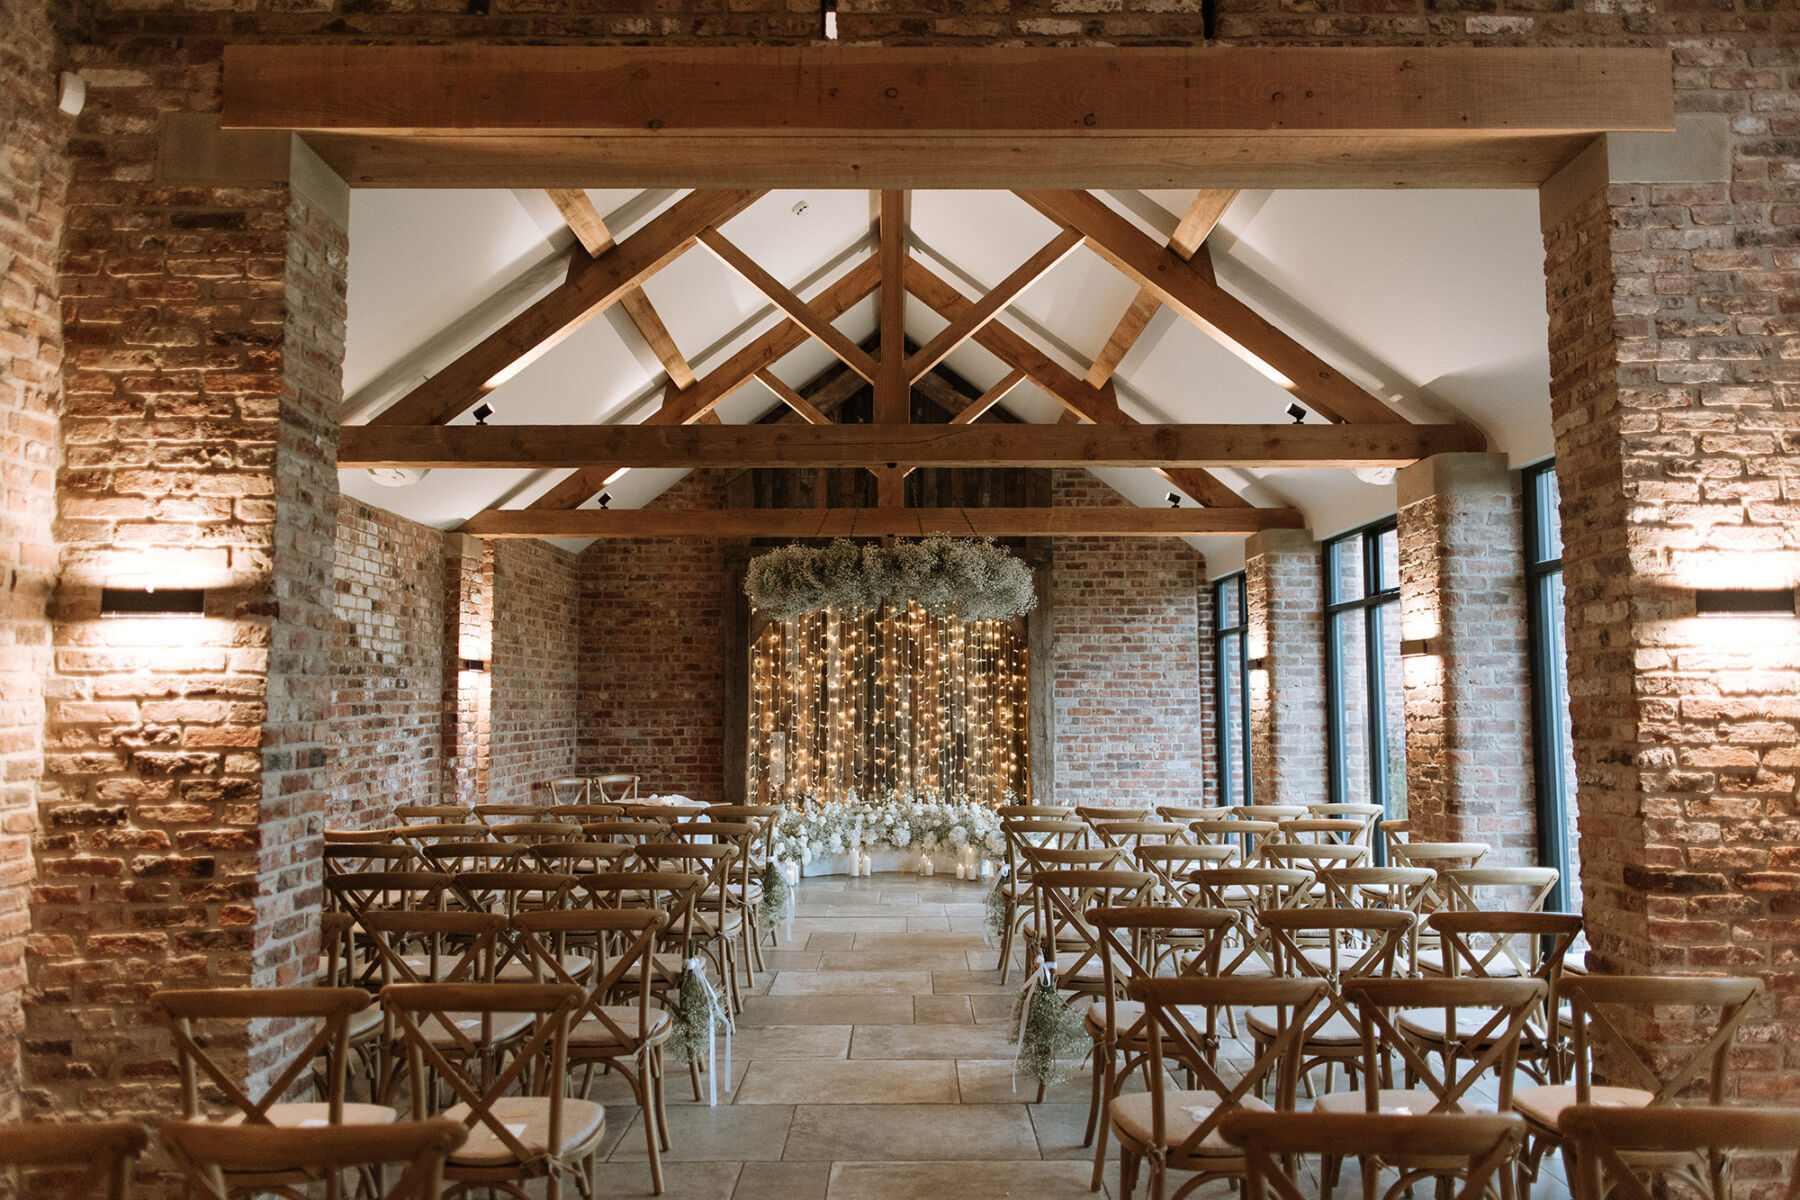 Thirsk Lodge Barns wedding ceremony space with gypsophila hanging from the ceiling and tied to crossback chairs.